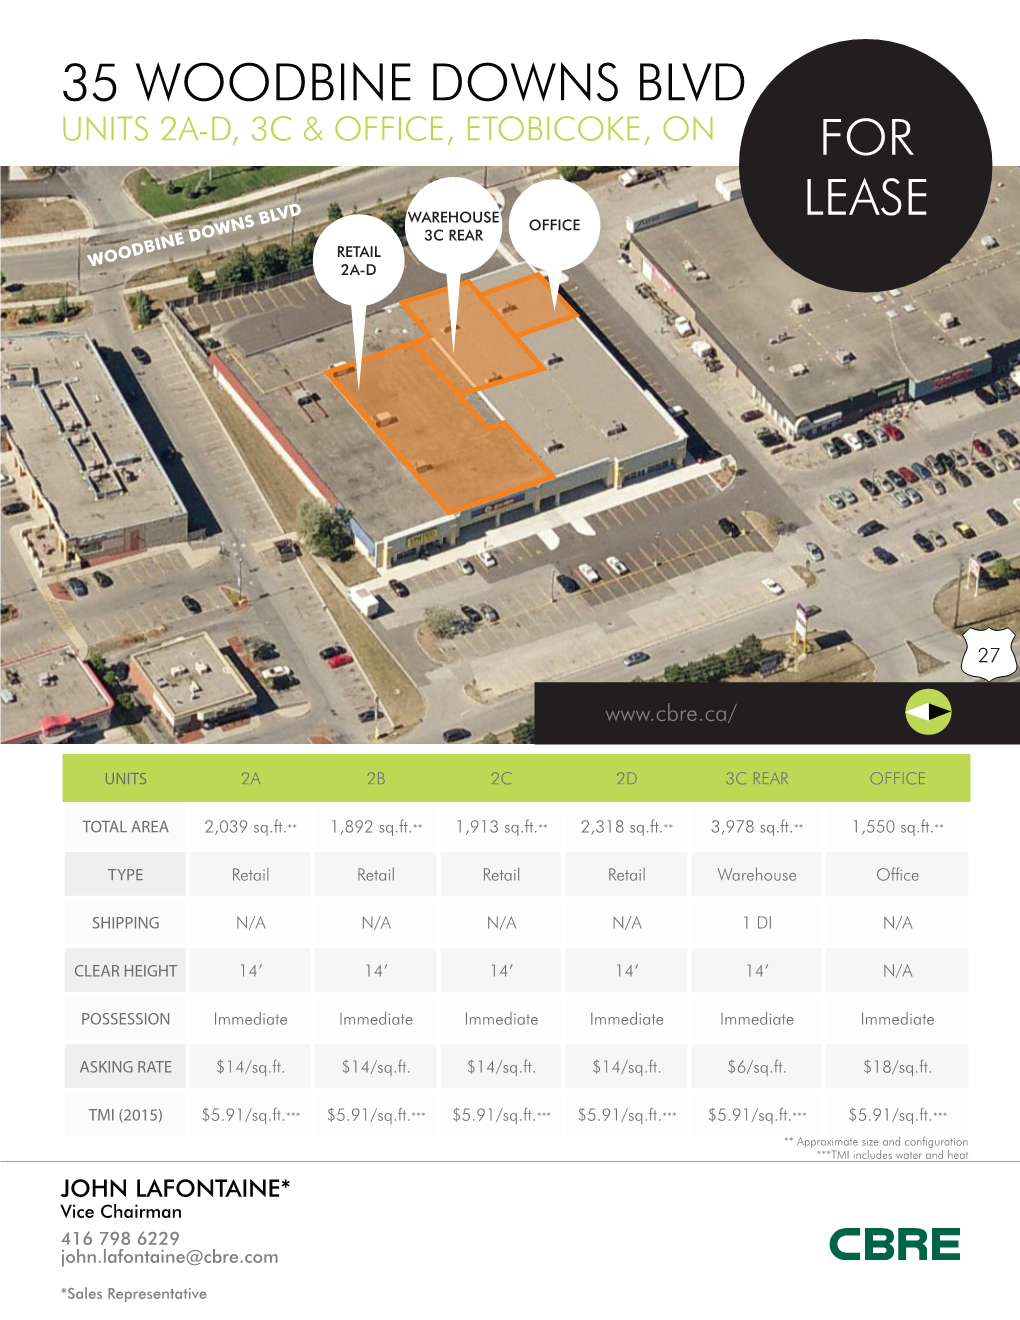 35 Woodbine Downs Blvd Units 2A-D, 3C & Office, Etobicoke, on For